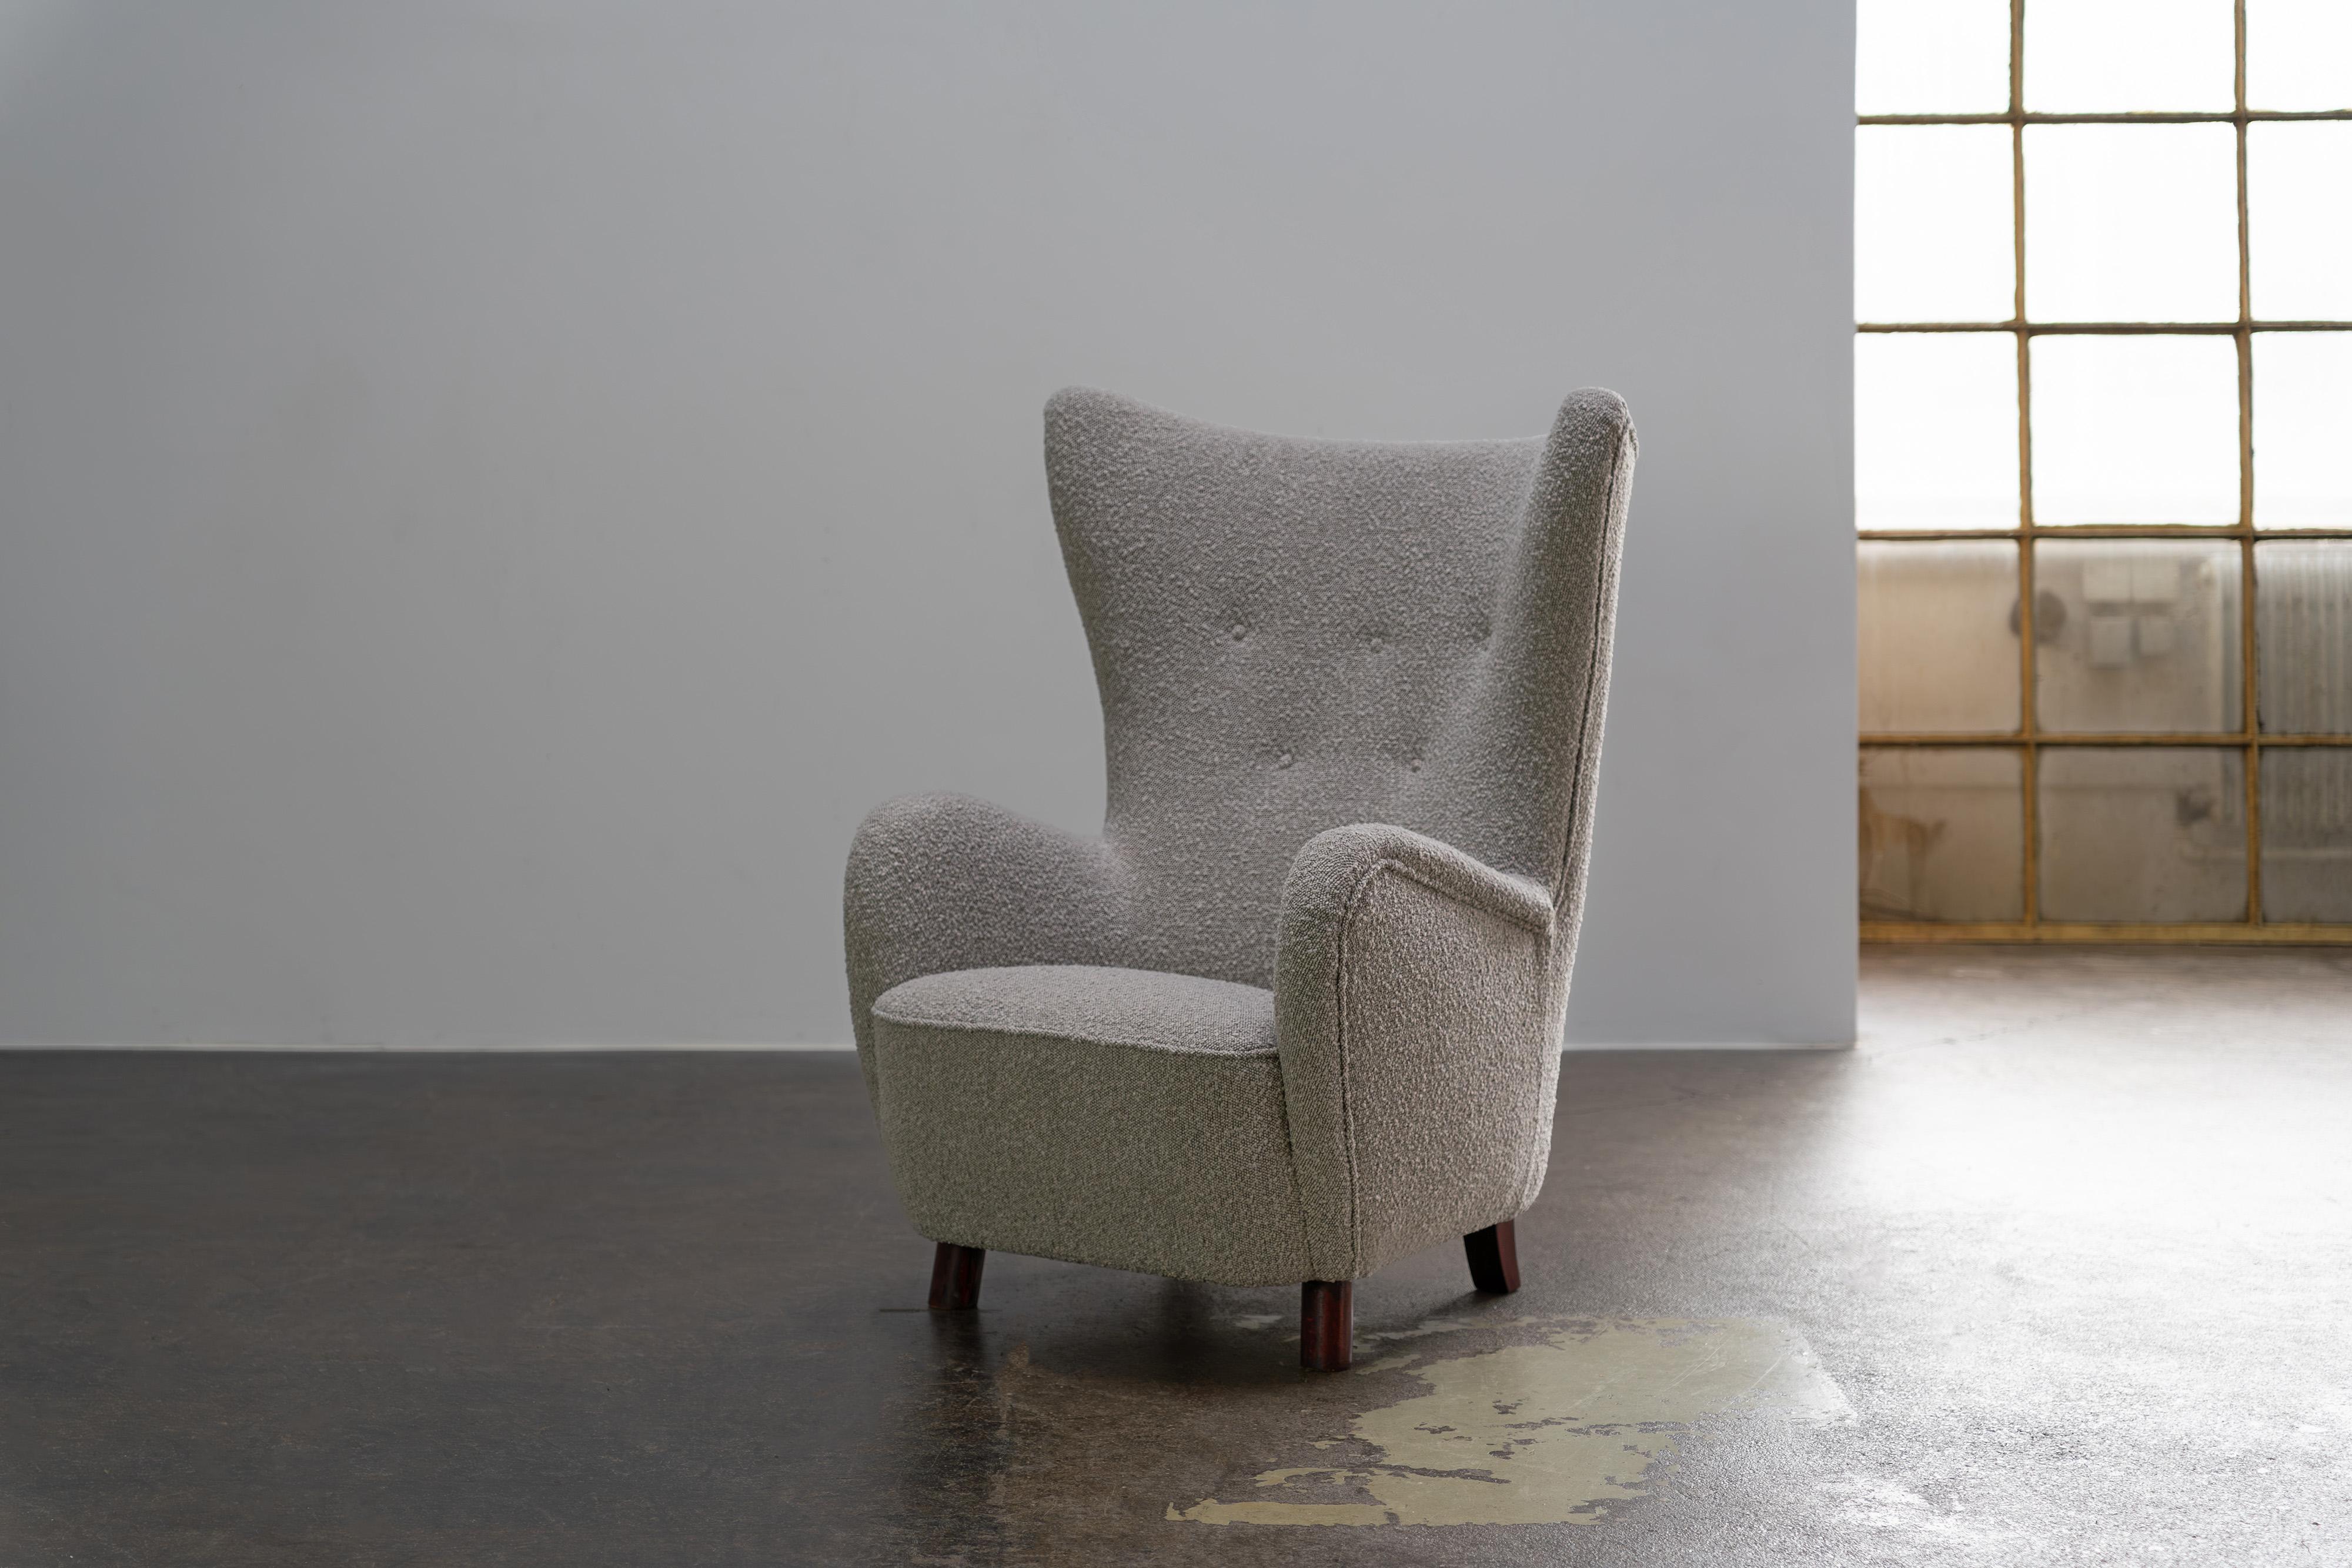 Vintage Mogens Lassen Wingback Chairs From Denmark, Boucle Fabric, 1950s For Sale 3